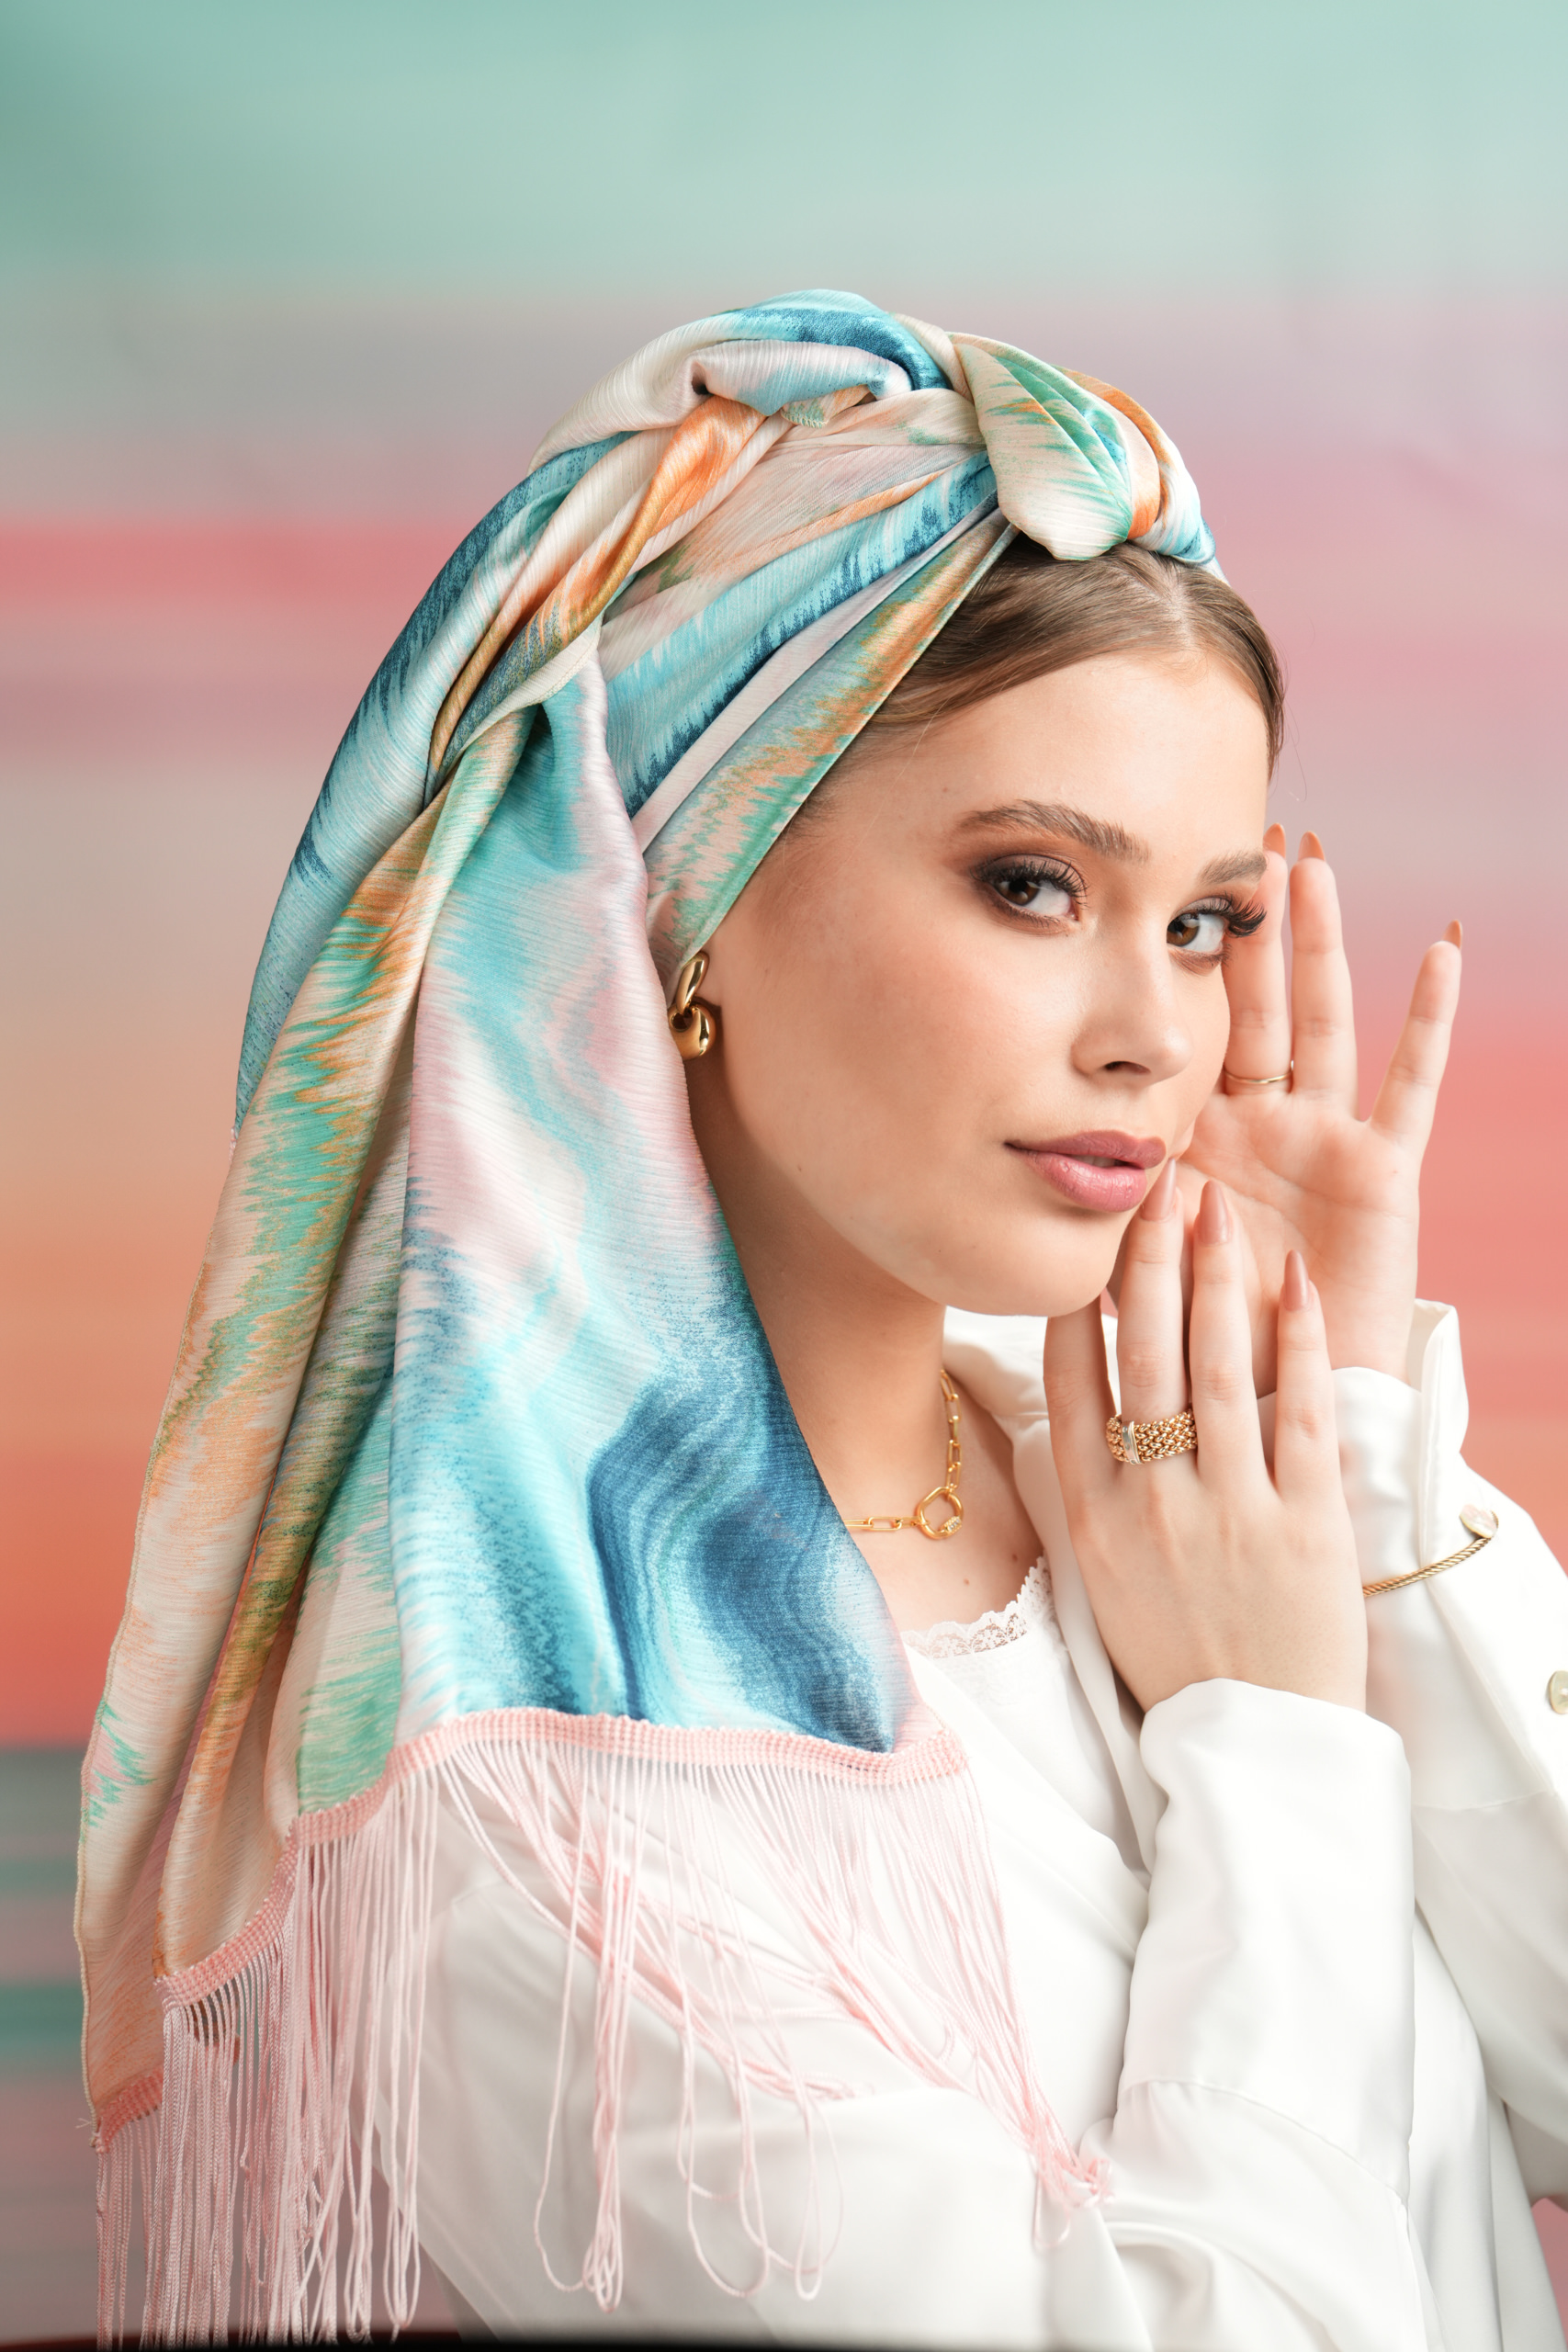 Printed Colorfull Headscarf with/without colorful fringes